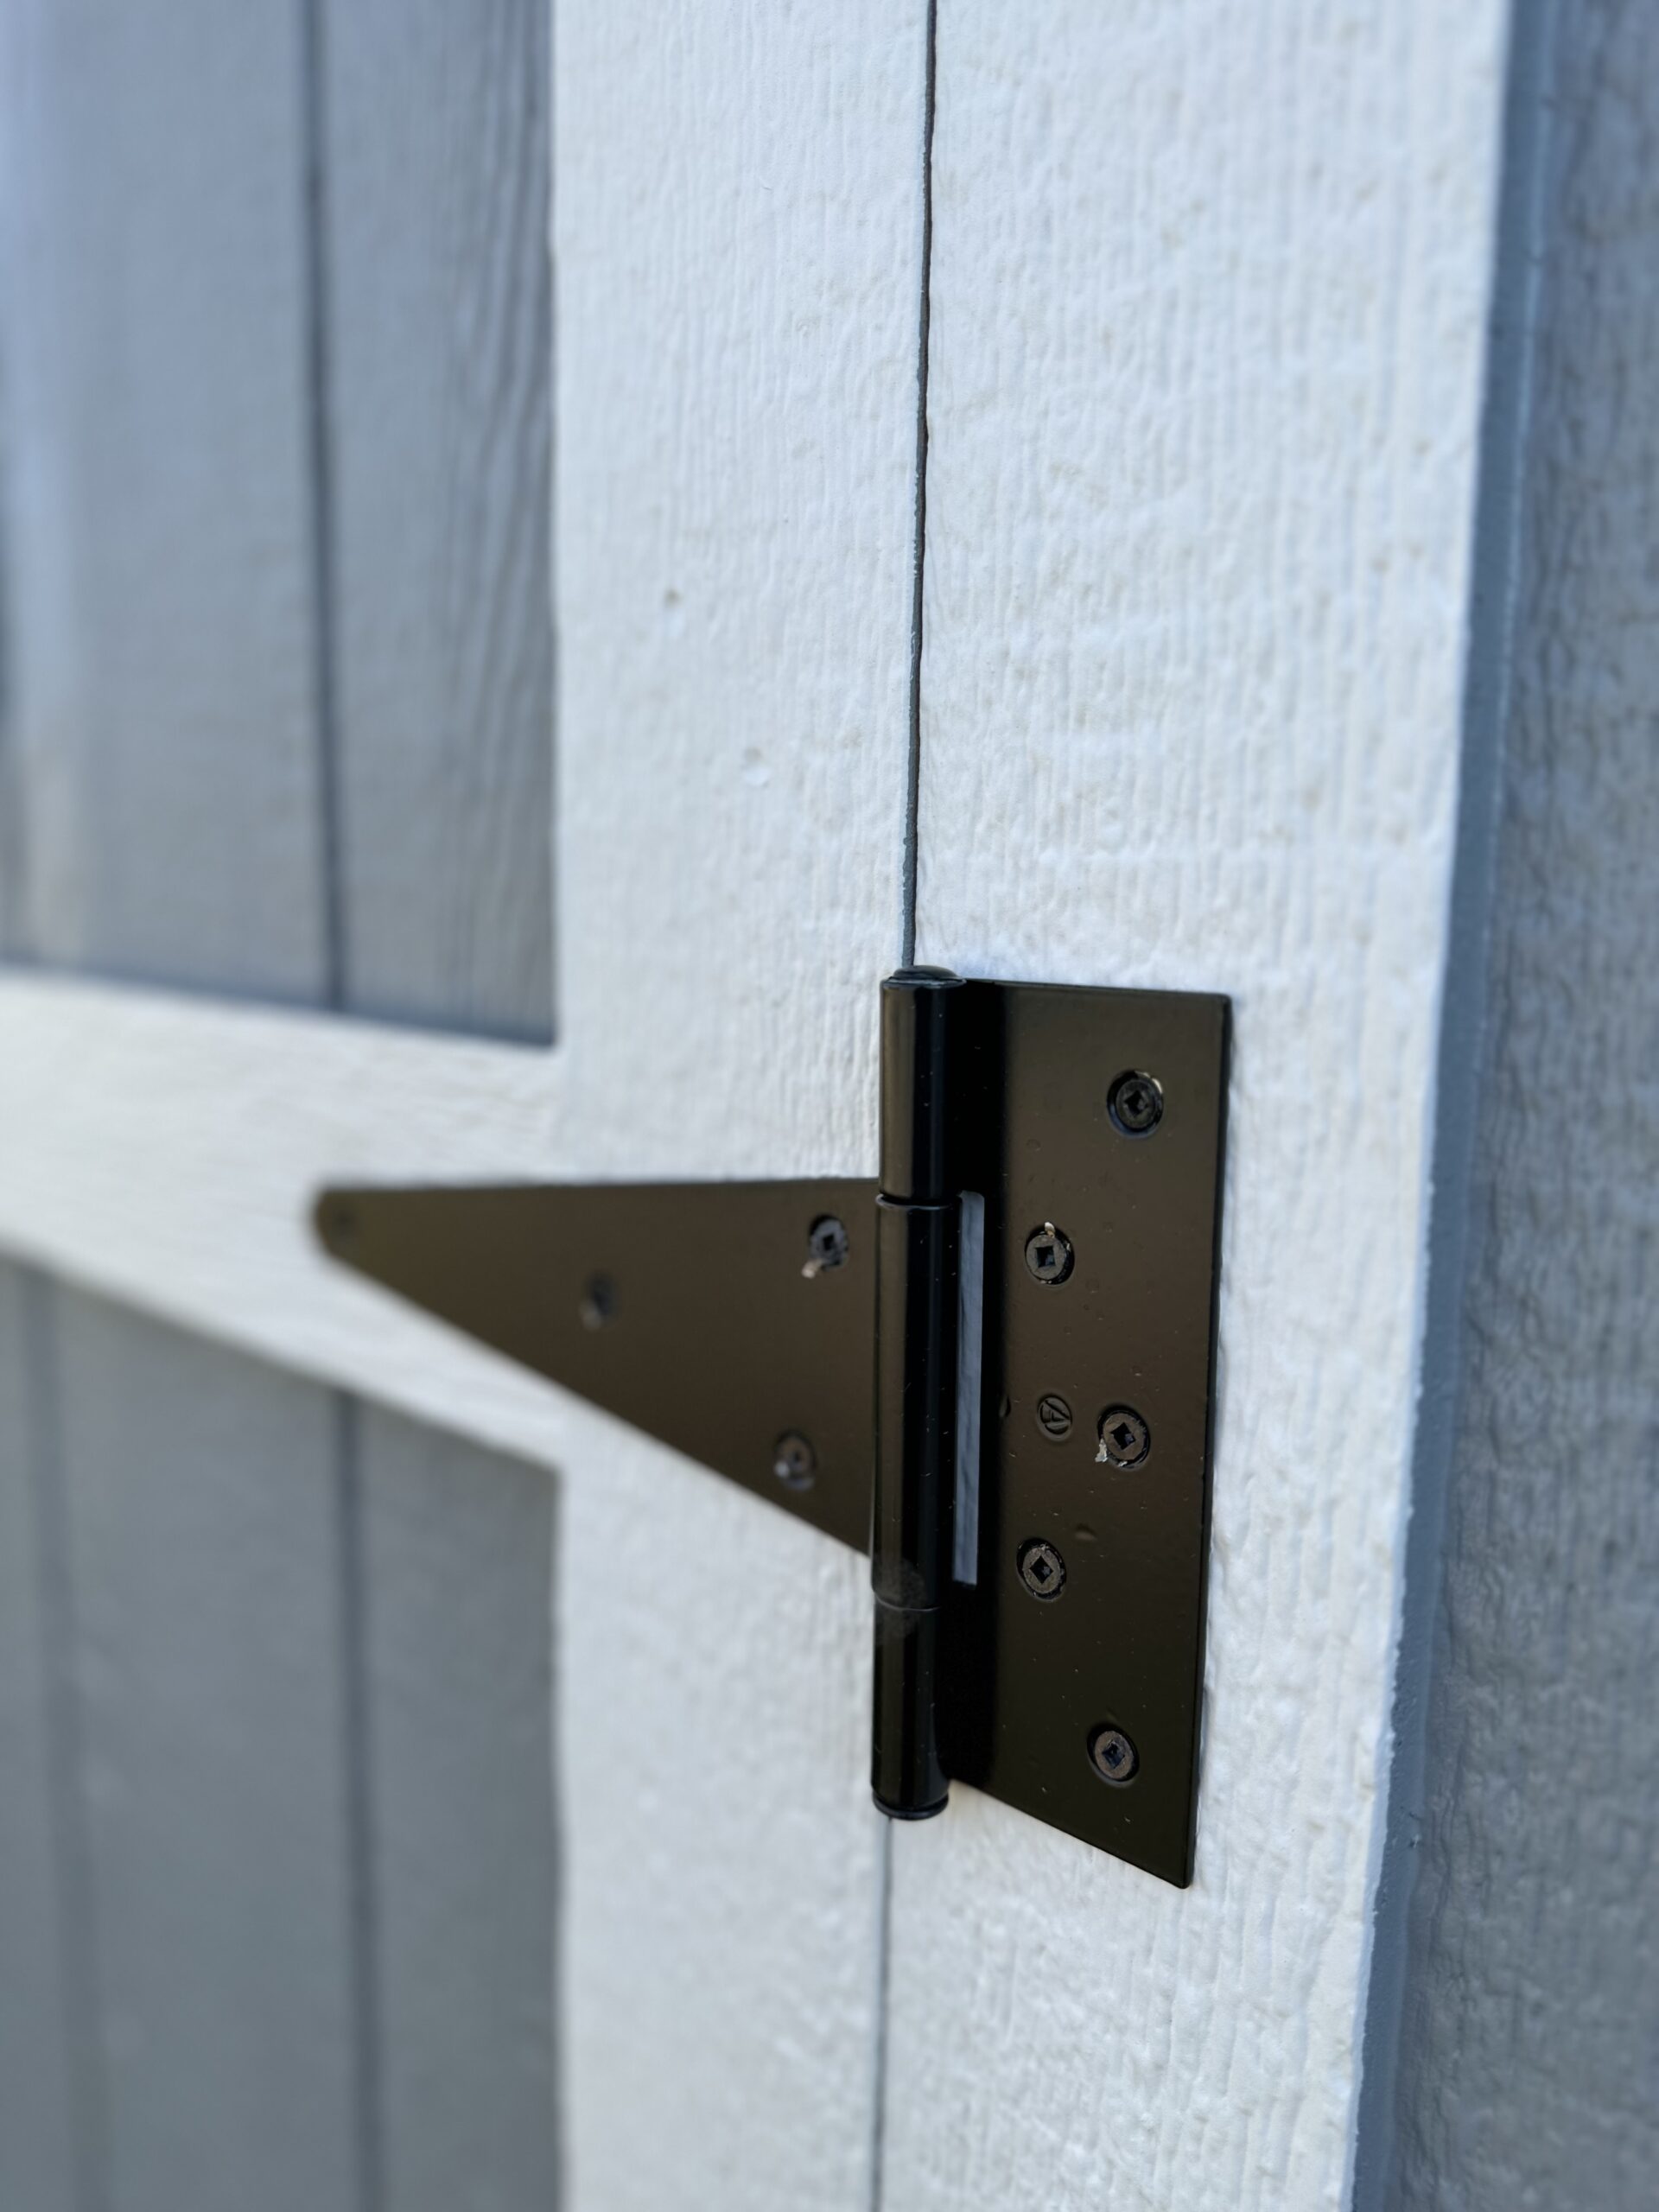 8" heavy-duty hinges on the door of the 10x16 garden shed 